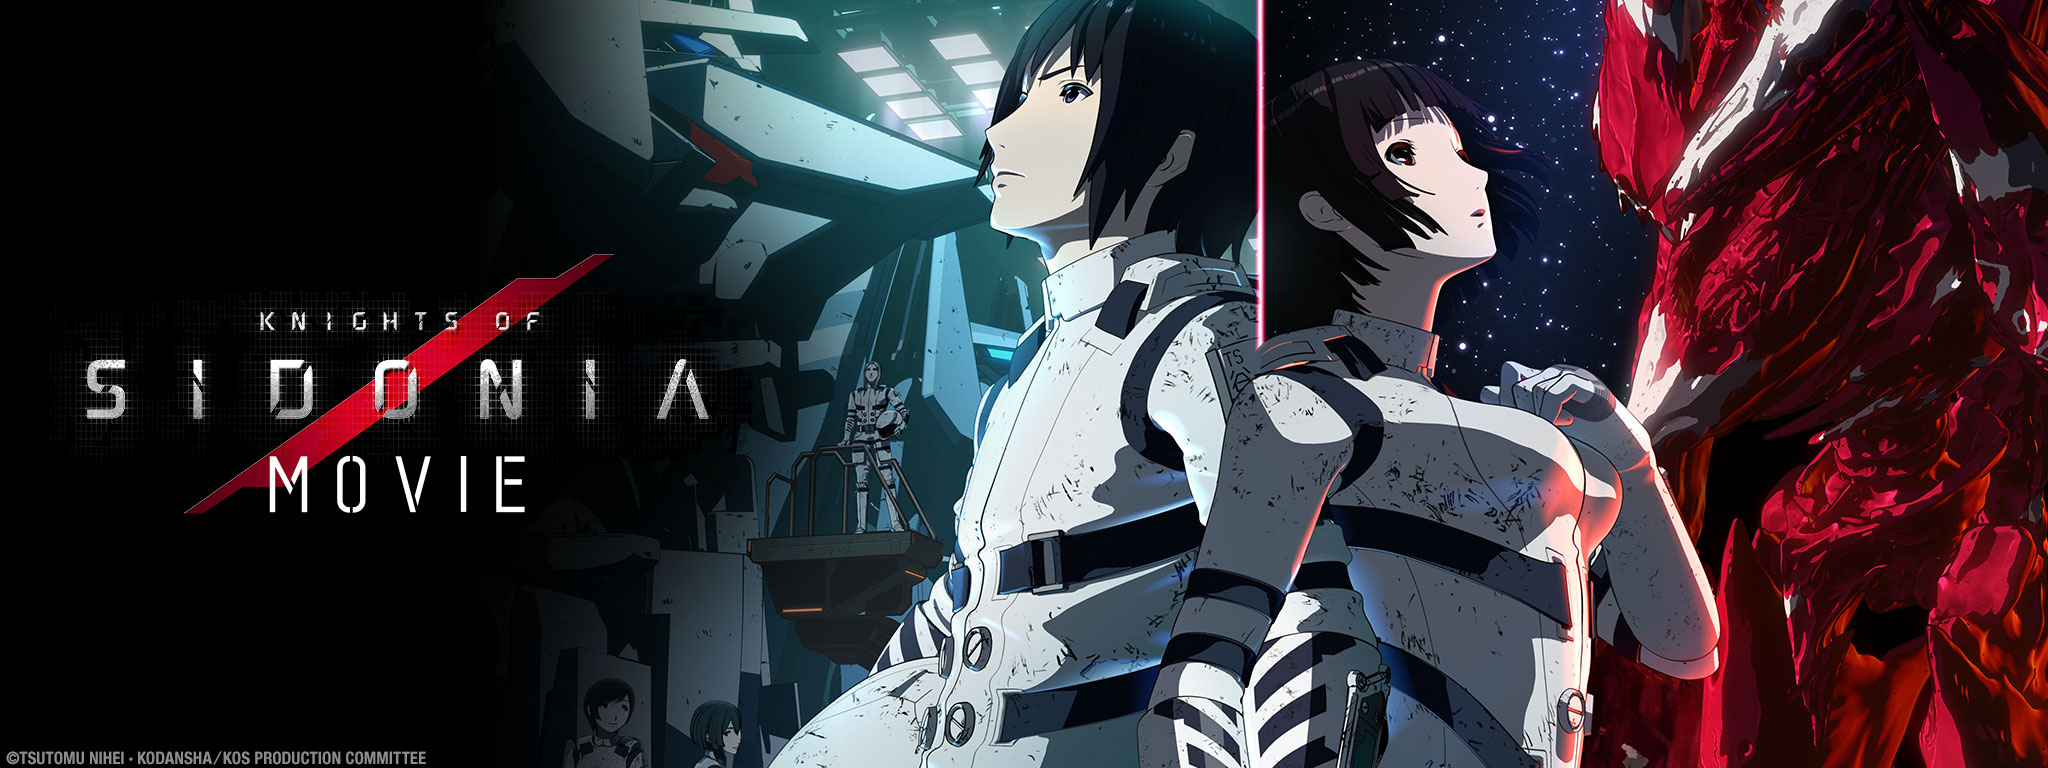 Title Art for Knights of Sidonia - Movie